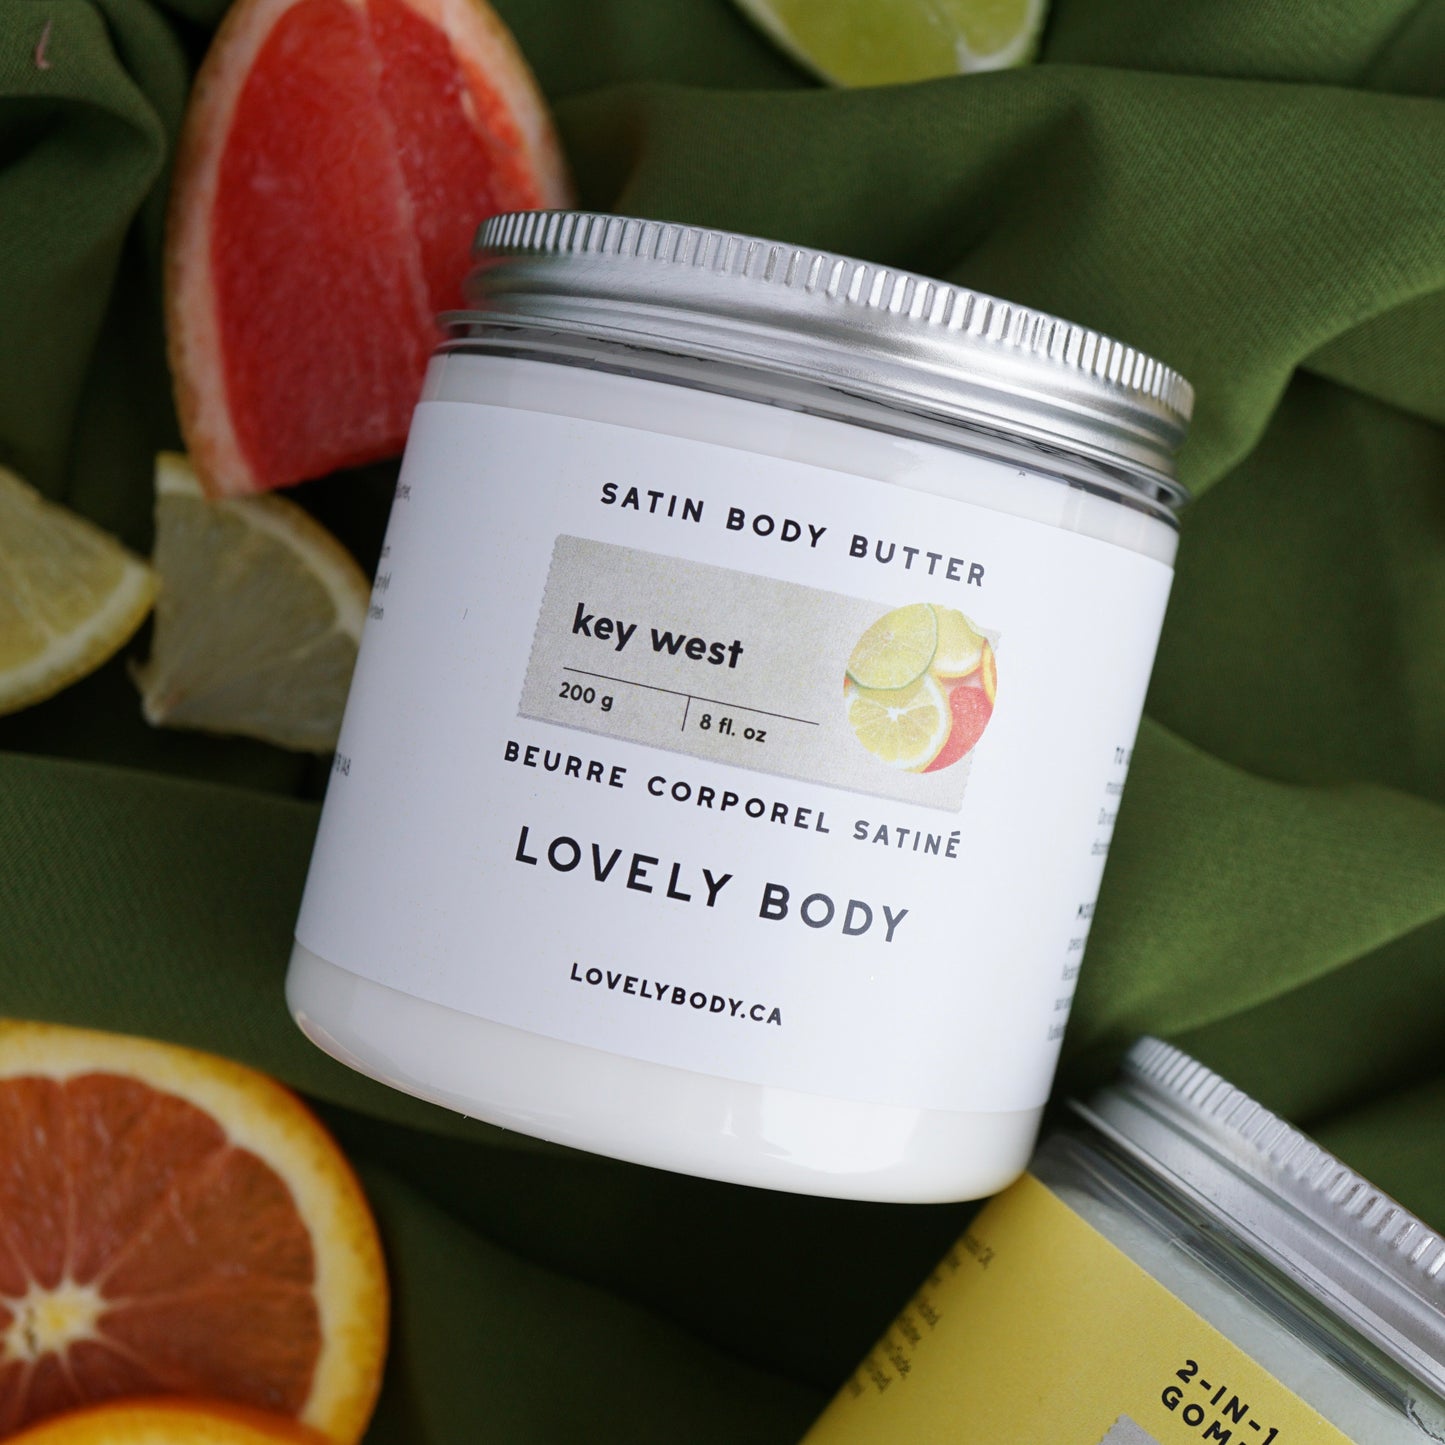 Key West Satin Body Butter - NEW Lemon and Lime Zest, Crushed Pineapple, Tonka